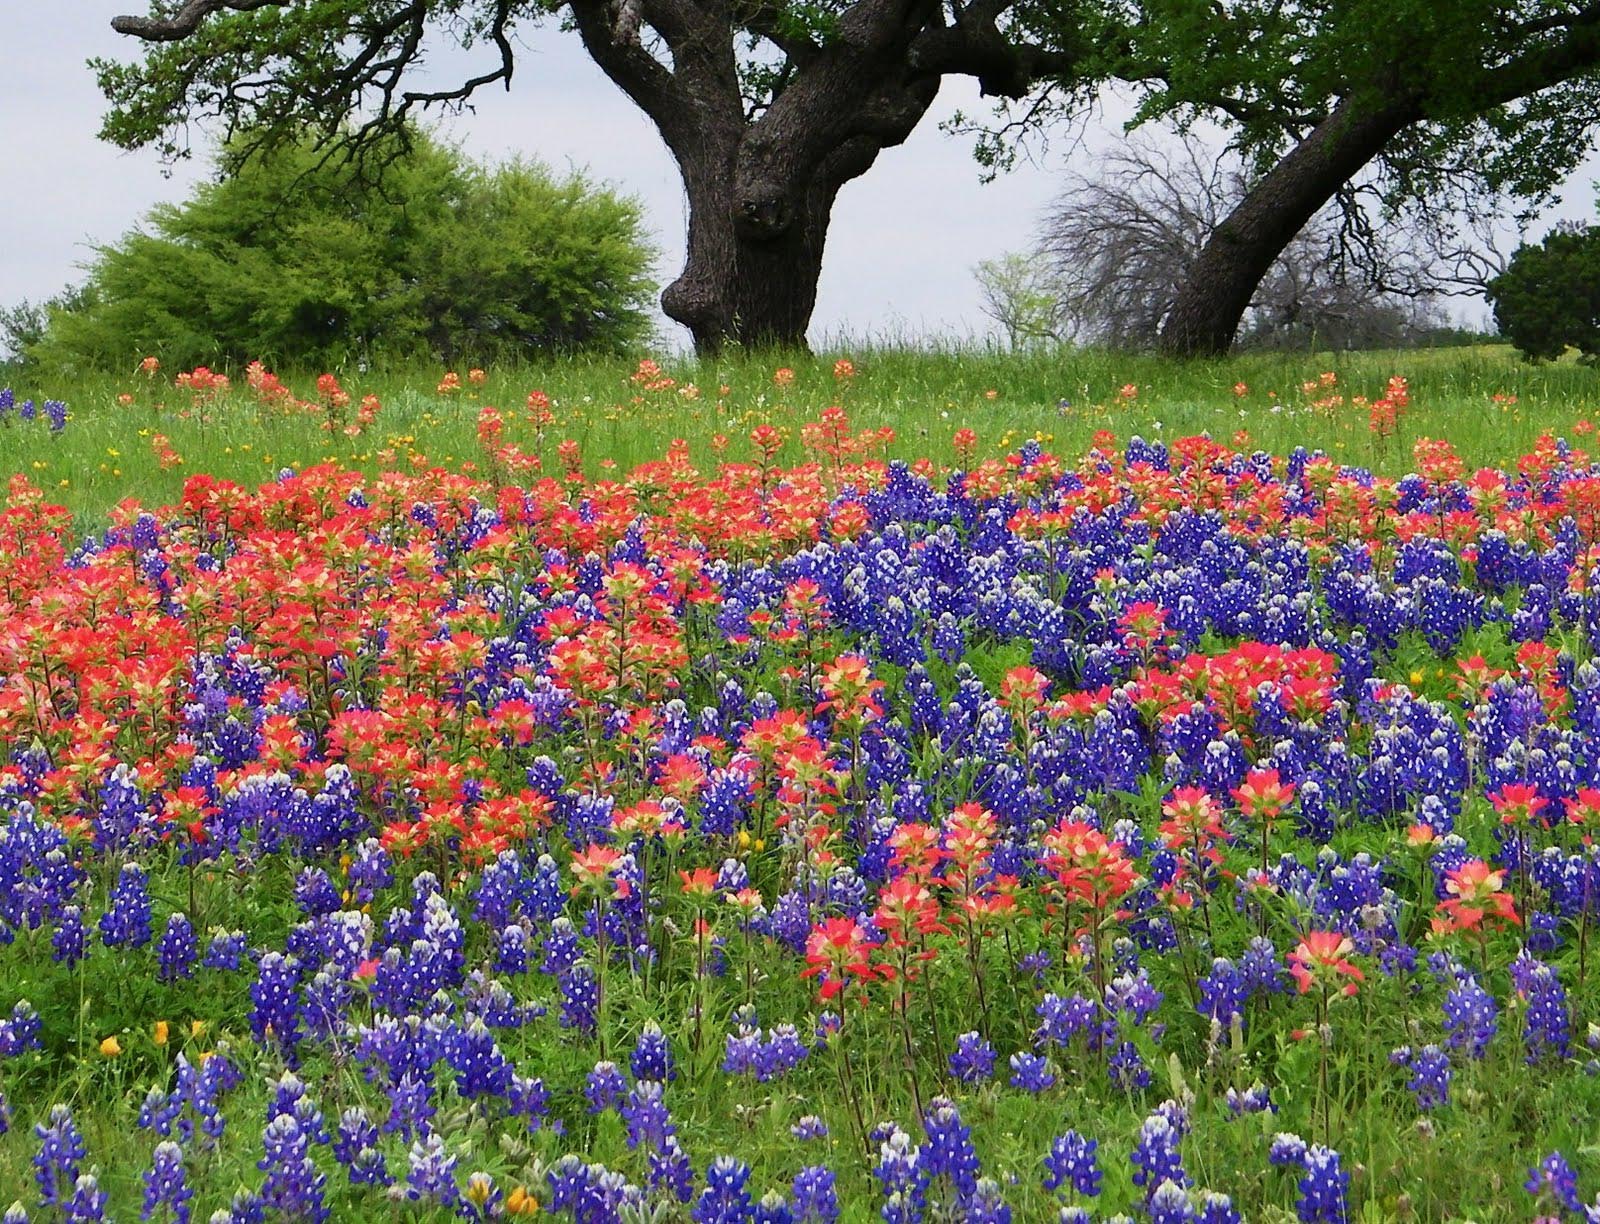 Bluebonnets and Indian Paintbrush Flowers